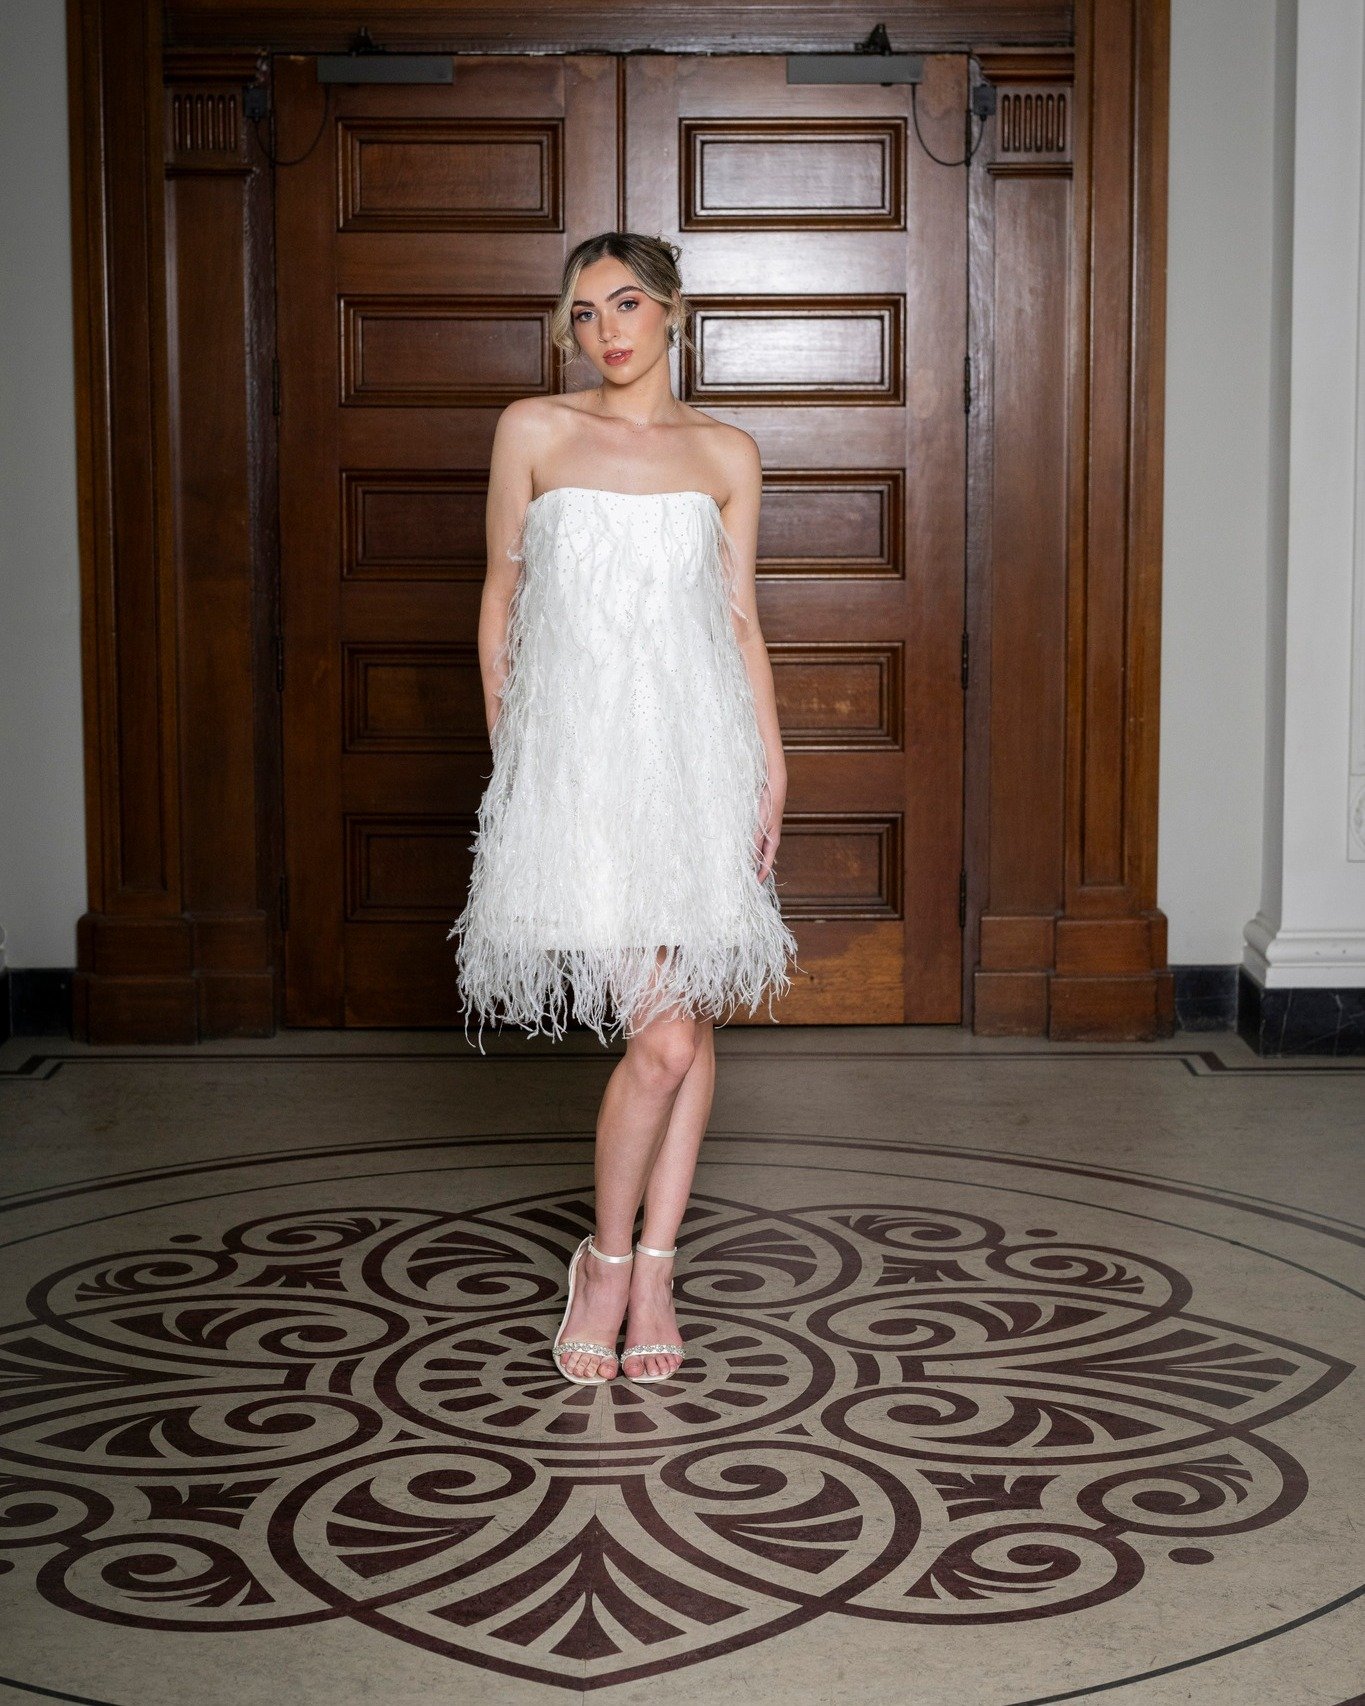 Planning an elopement or looking for a reception party dress? The Jami Mini Dress is made for fun with its beautiful feathers and sequin detailing. Book an appointment to try it on now.
.
.
Photographer @kym_burmester
H&amp;MU @thehairandmakeupartist